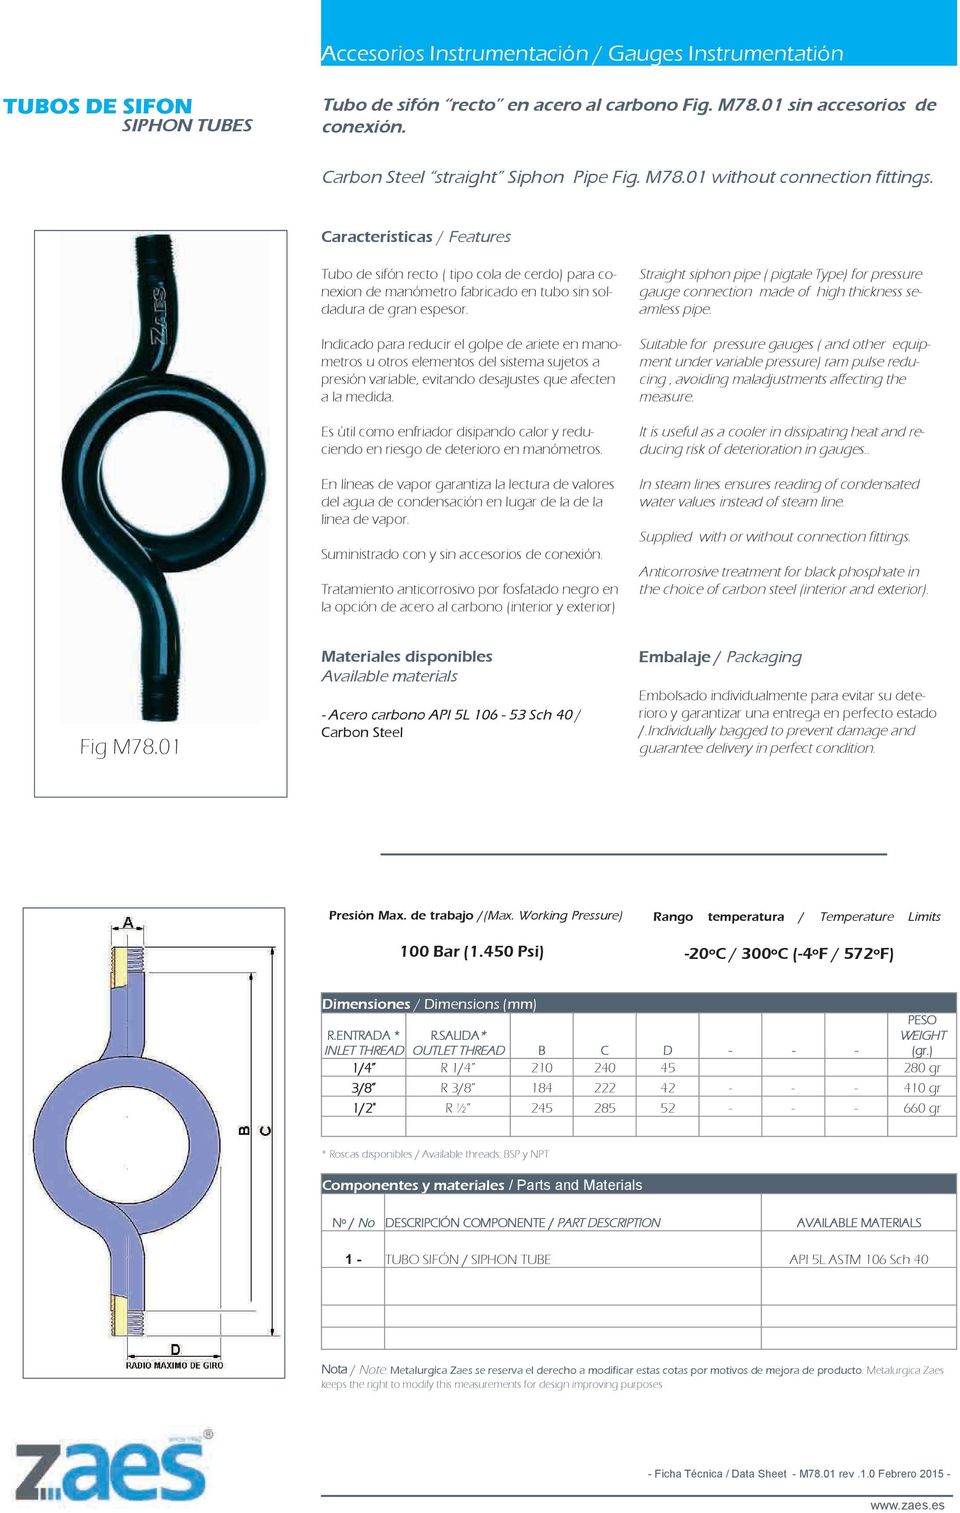 siphon pipe ( pigtale Type) for pressure gauge connection made of high thickness seamless pipe. Fig M78.